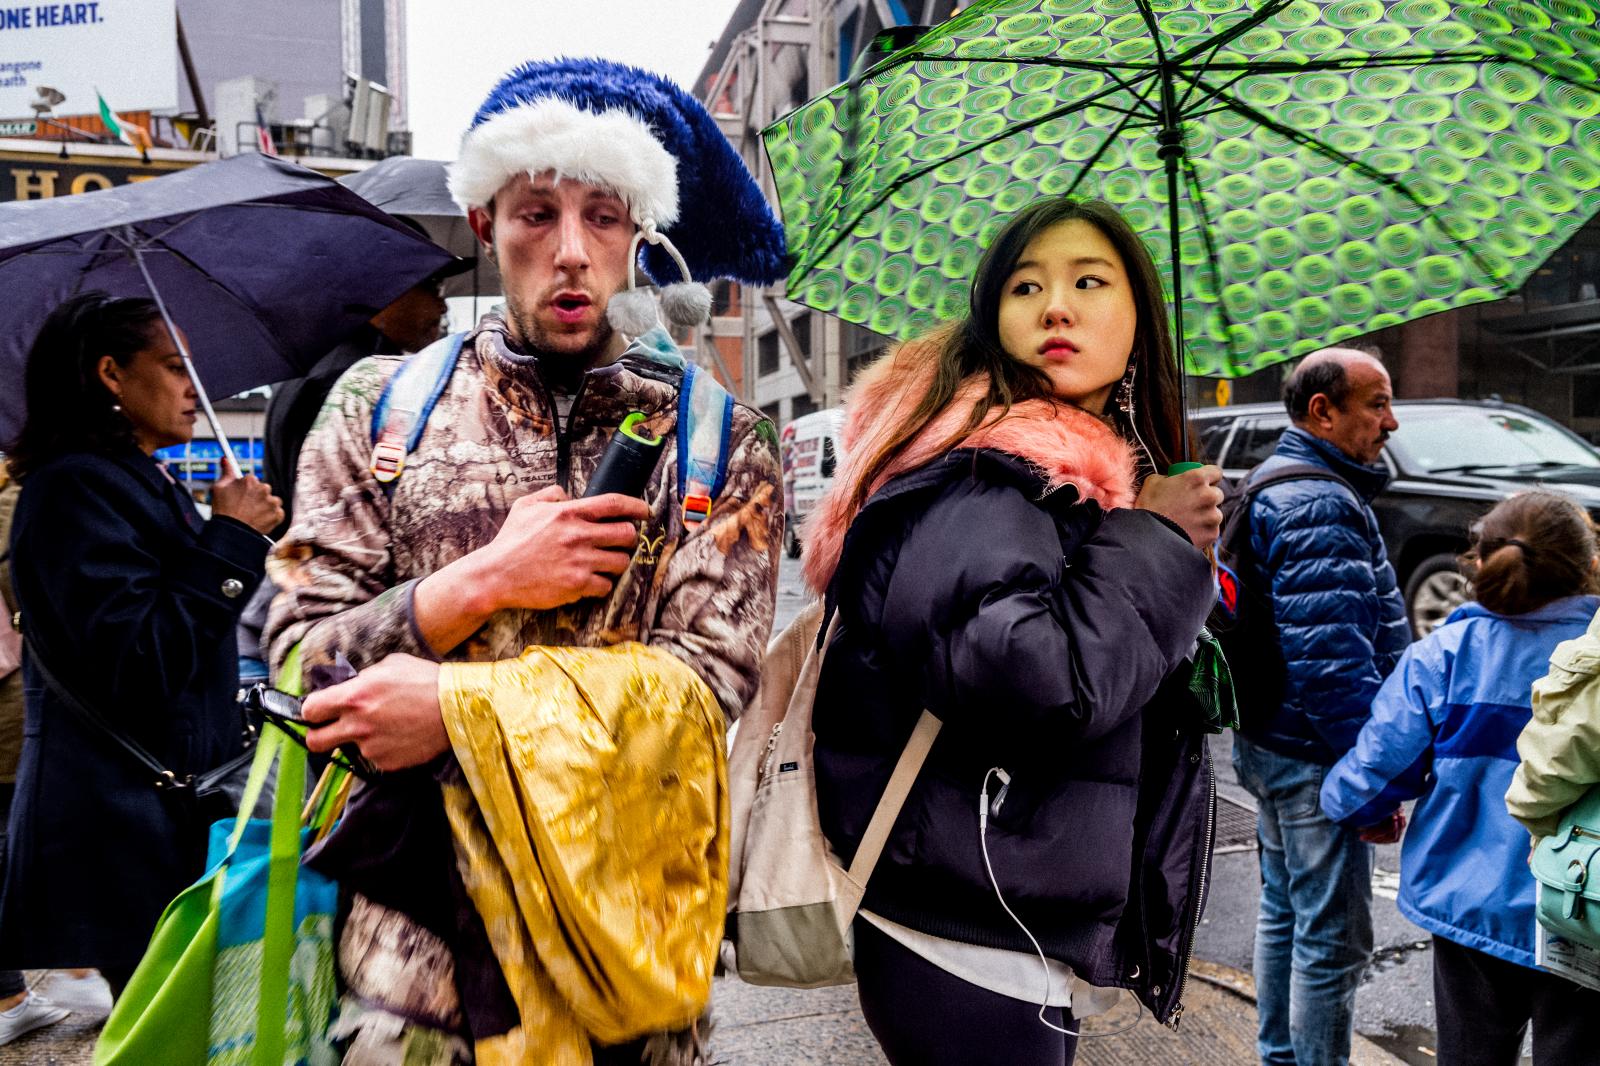 Street Photography/Color Works -  Midtown, Manhattan NYC  April 2018 